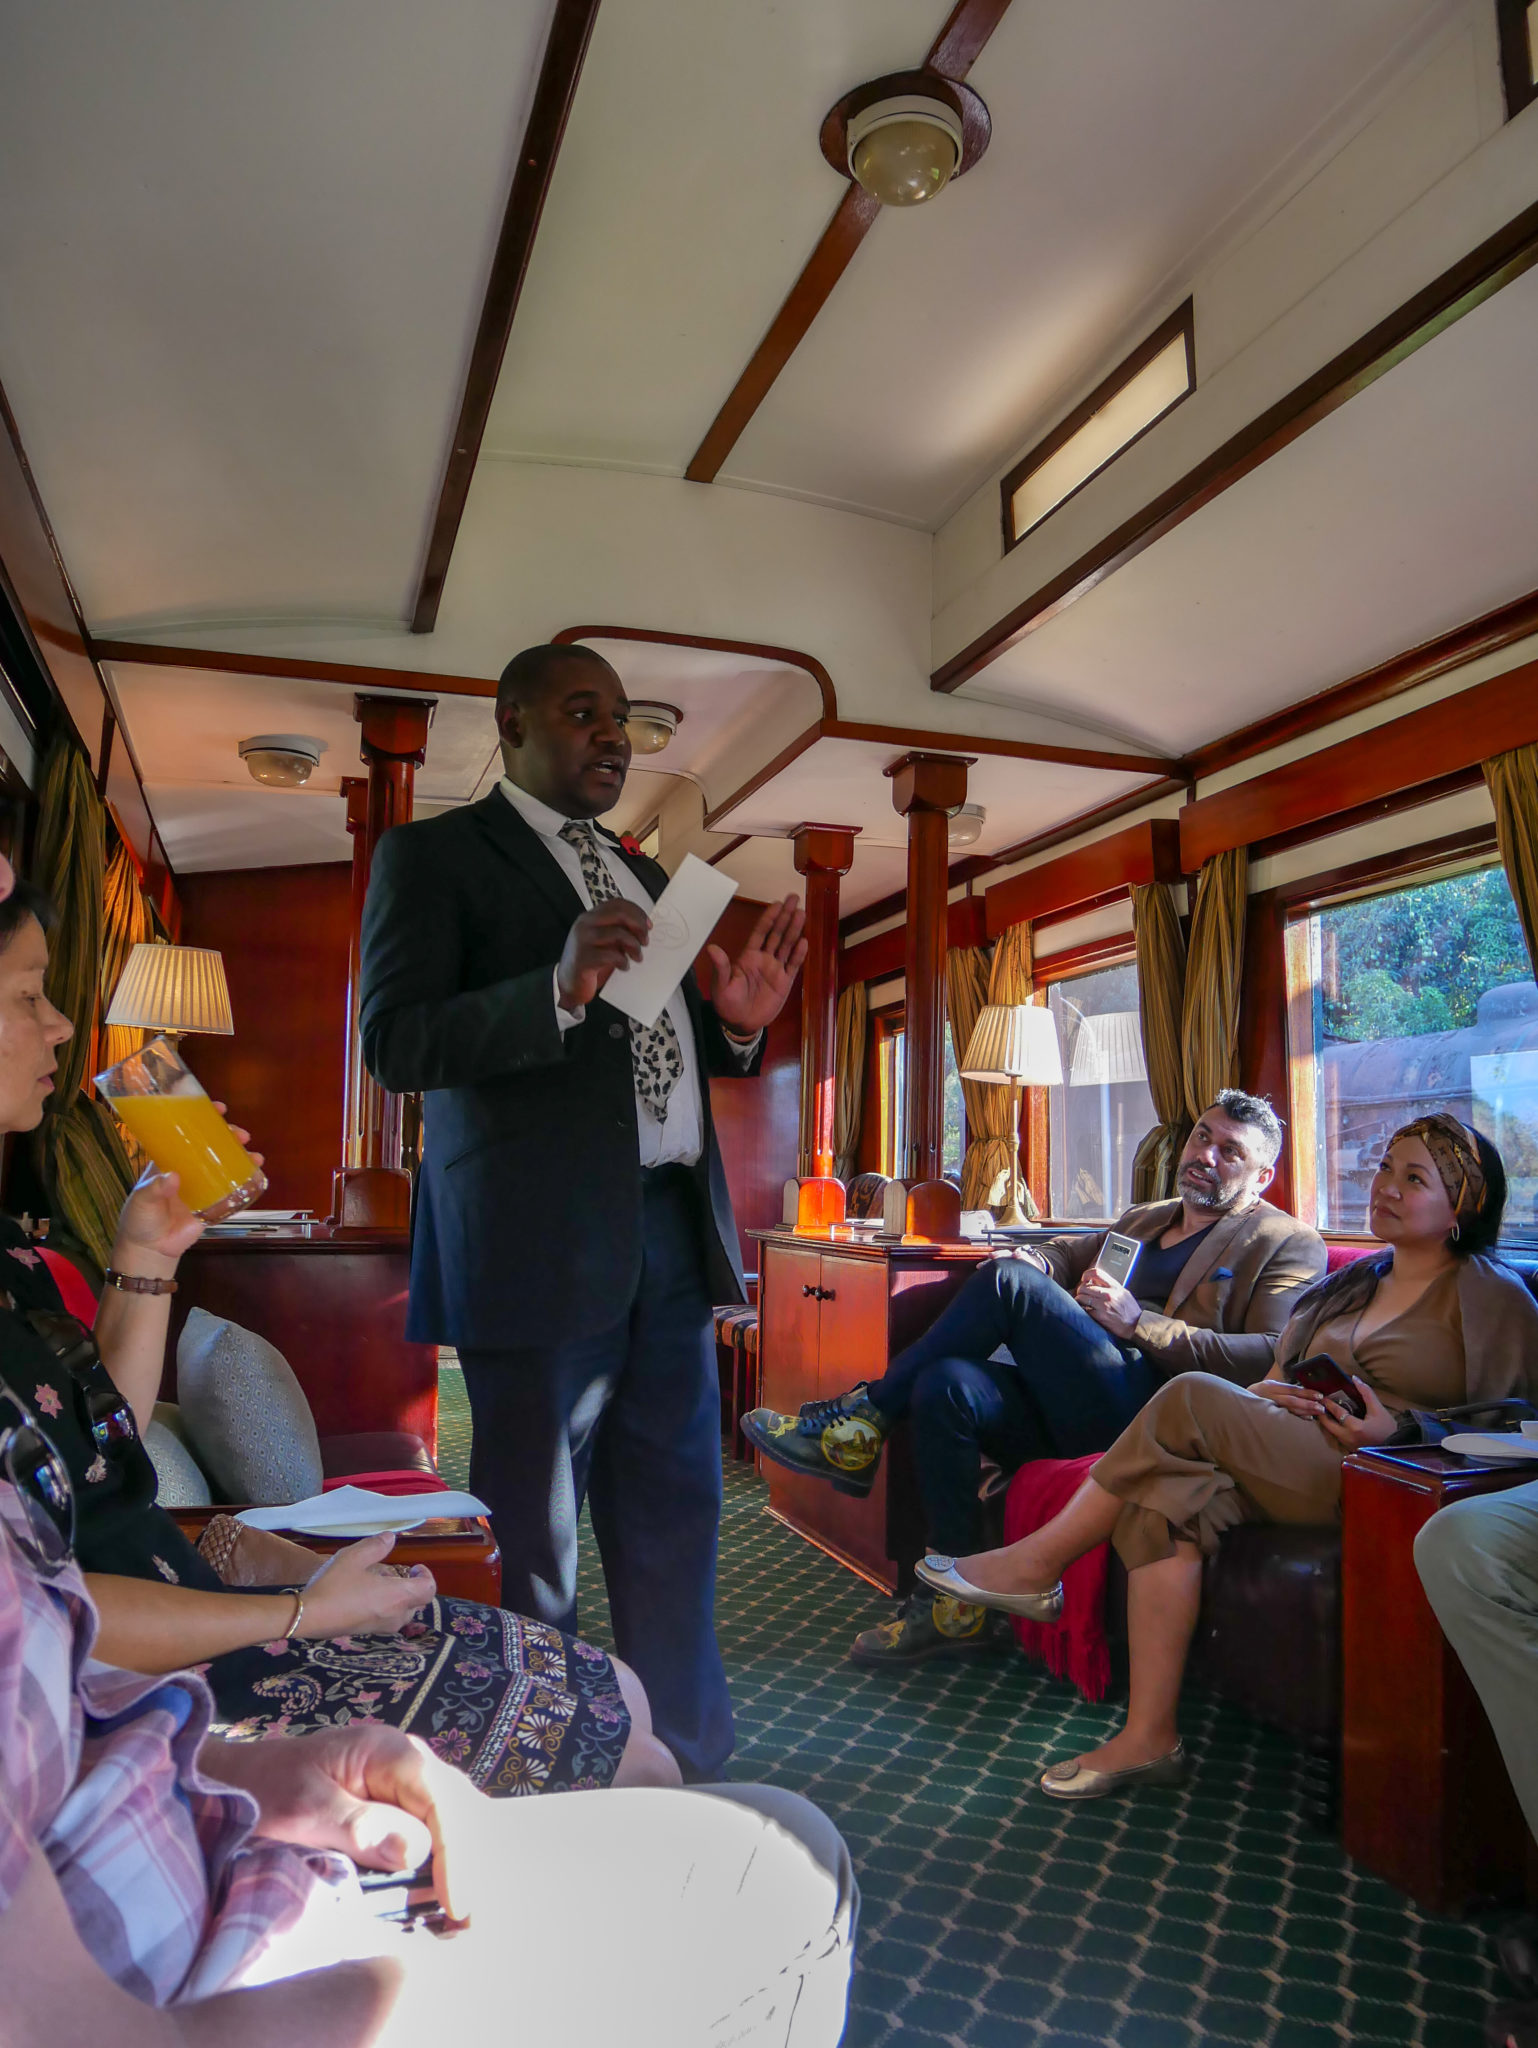 The host talks to guests in the Lounge Car of the Royal Livingstone Express train